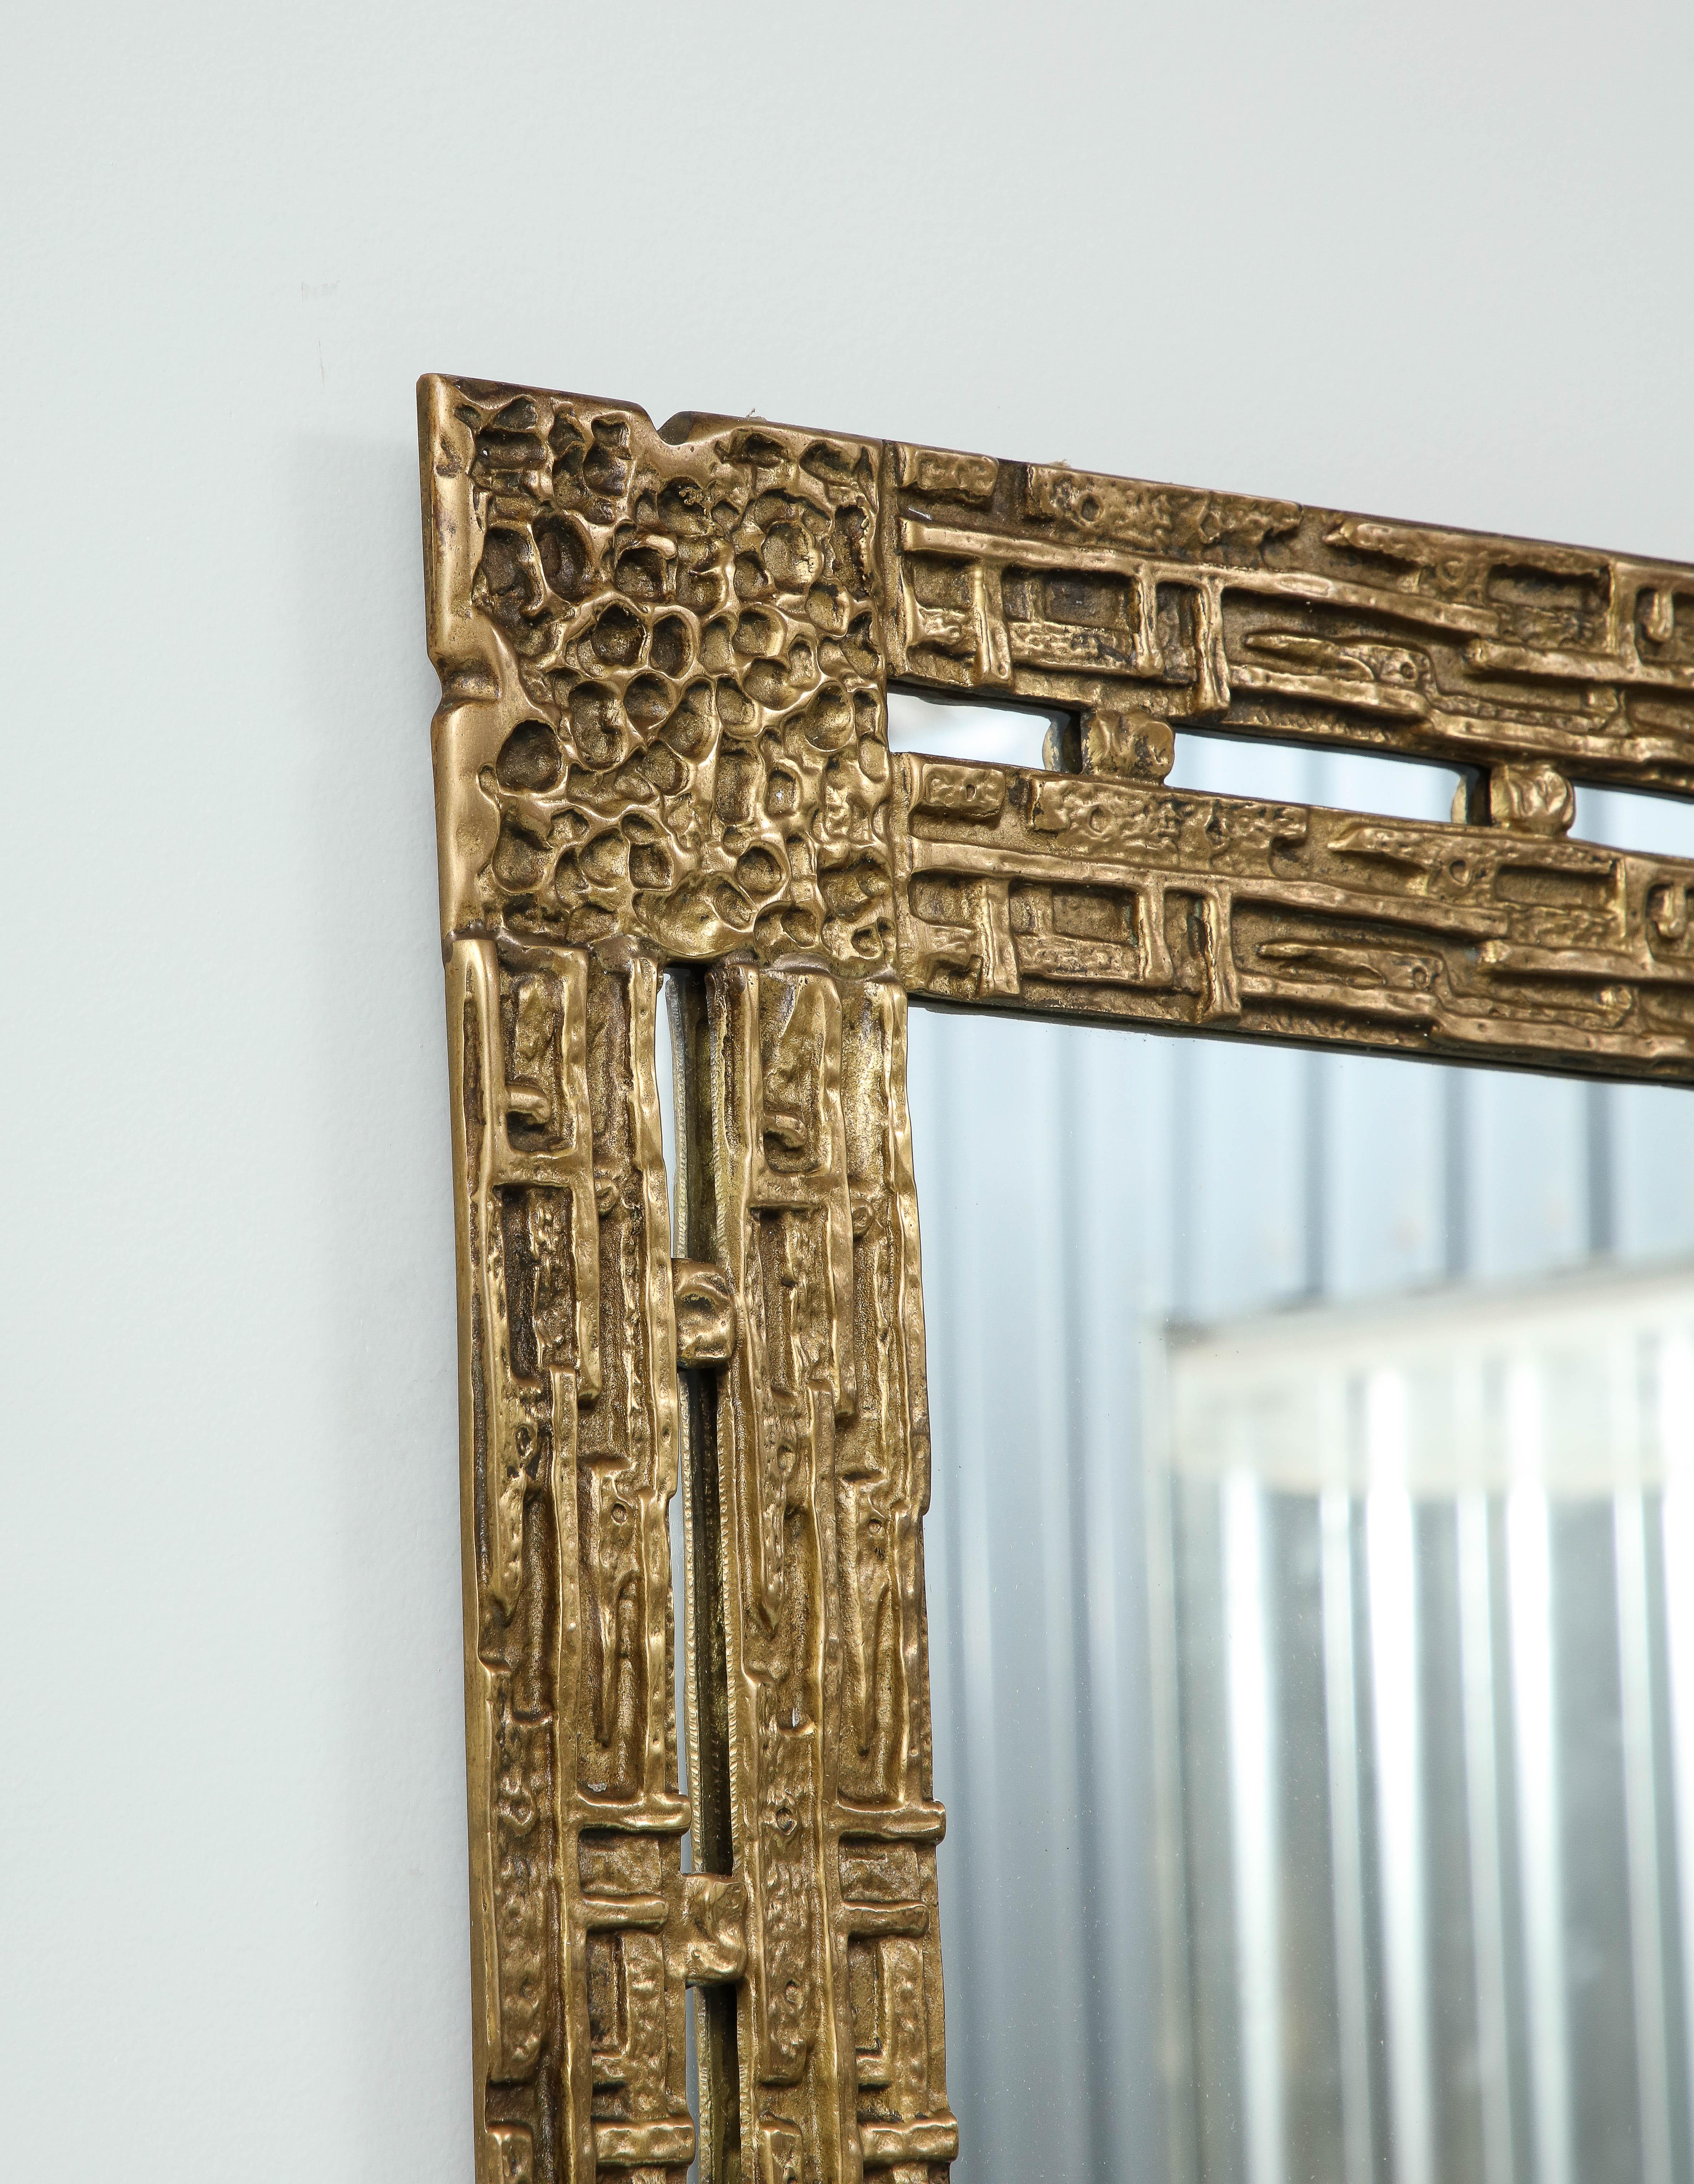 This brutalist mirror has the esthetics of the 80's. The frame is in brass with a sculptural design. 